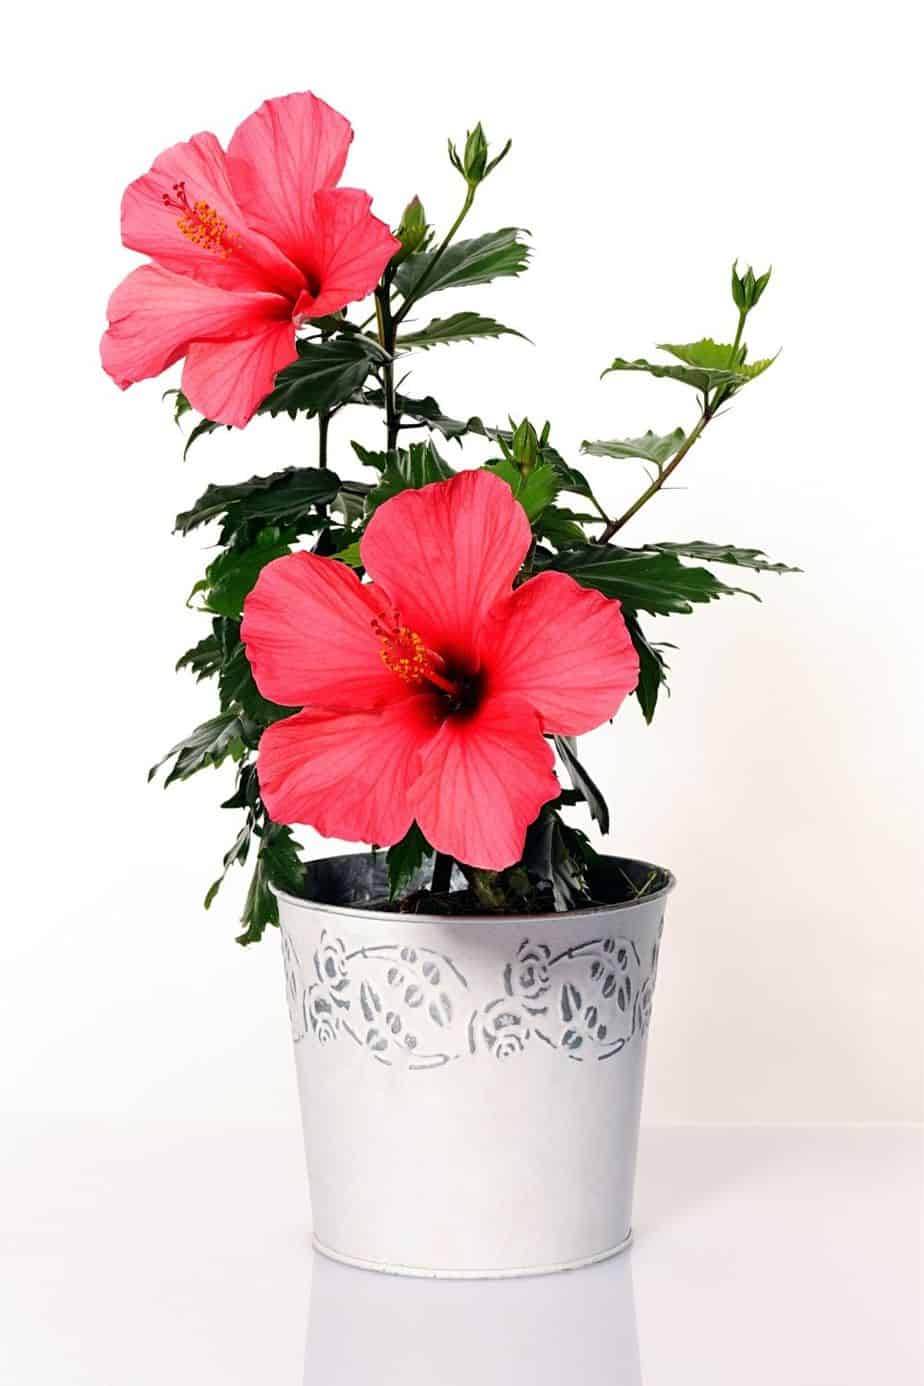 Hibiscus is another colorful plant that you can add to your growing collection in a west-facing balcony